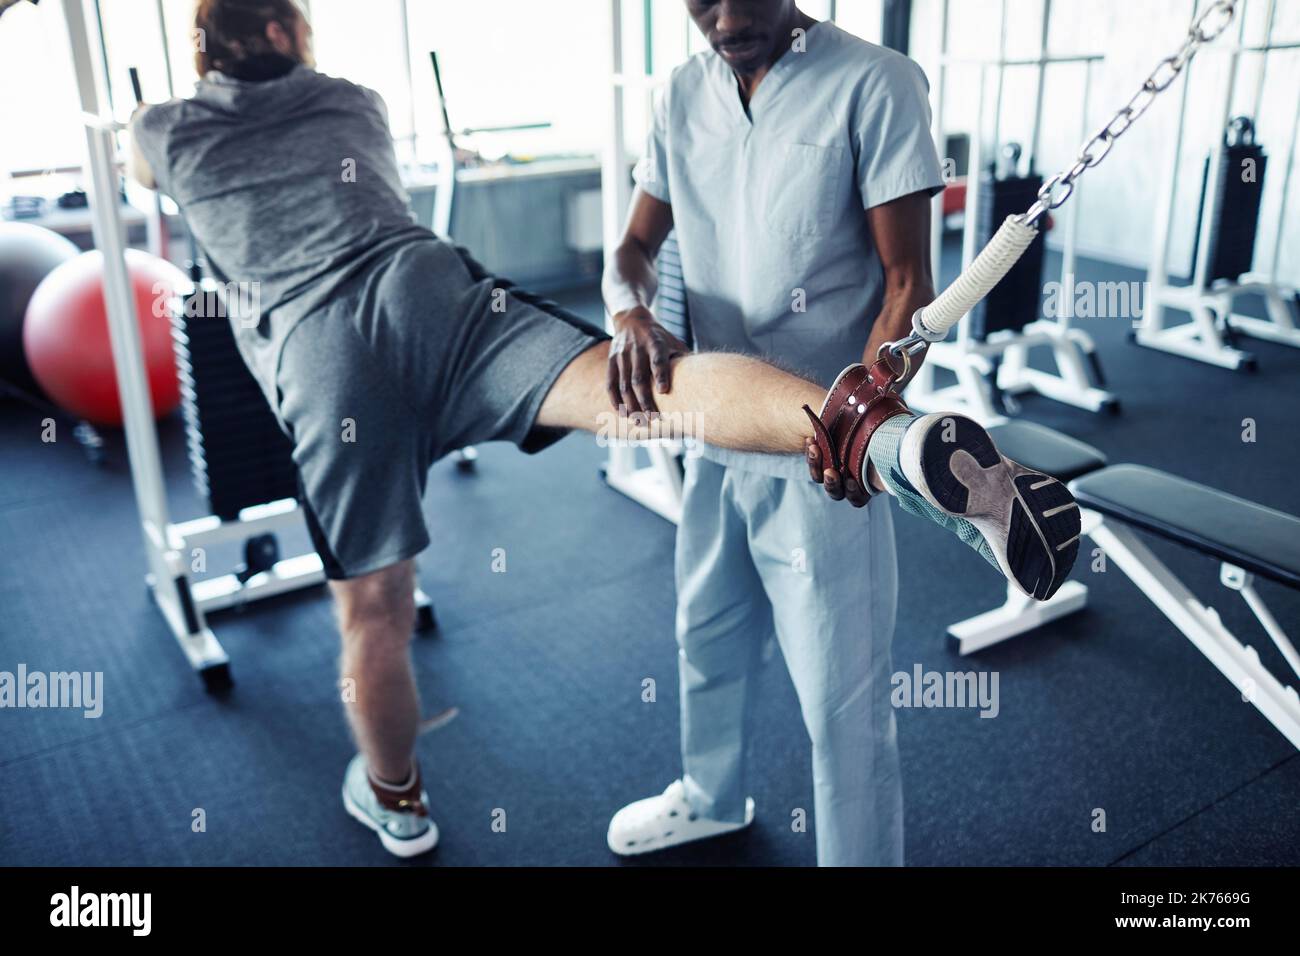 Rear view of young patient exercising on sport equipment to stretch his injury leg while holding rehabilitation with therapist in gym Stock Photo